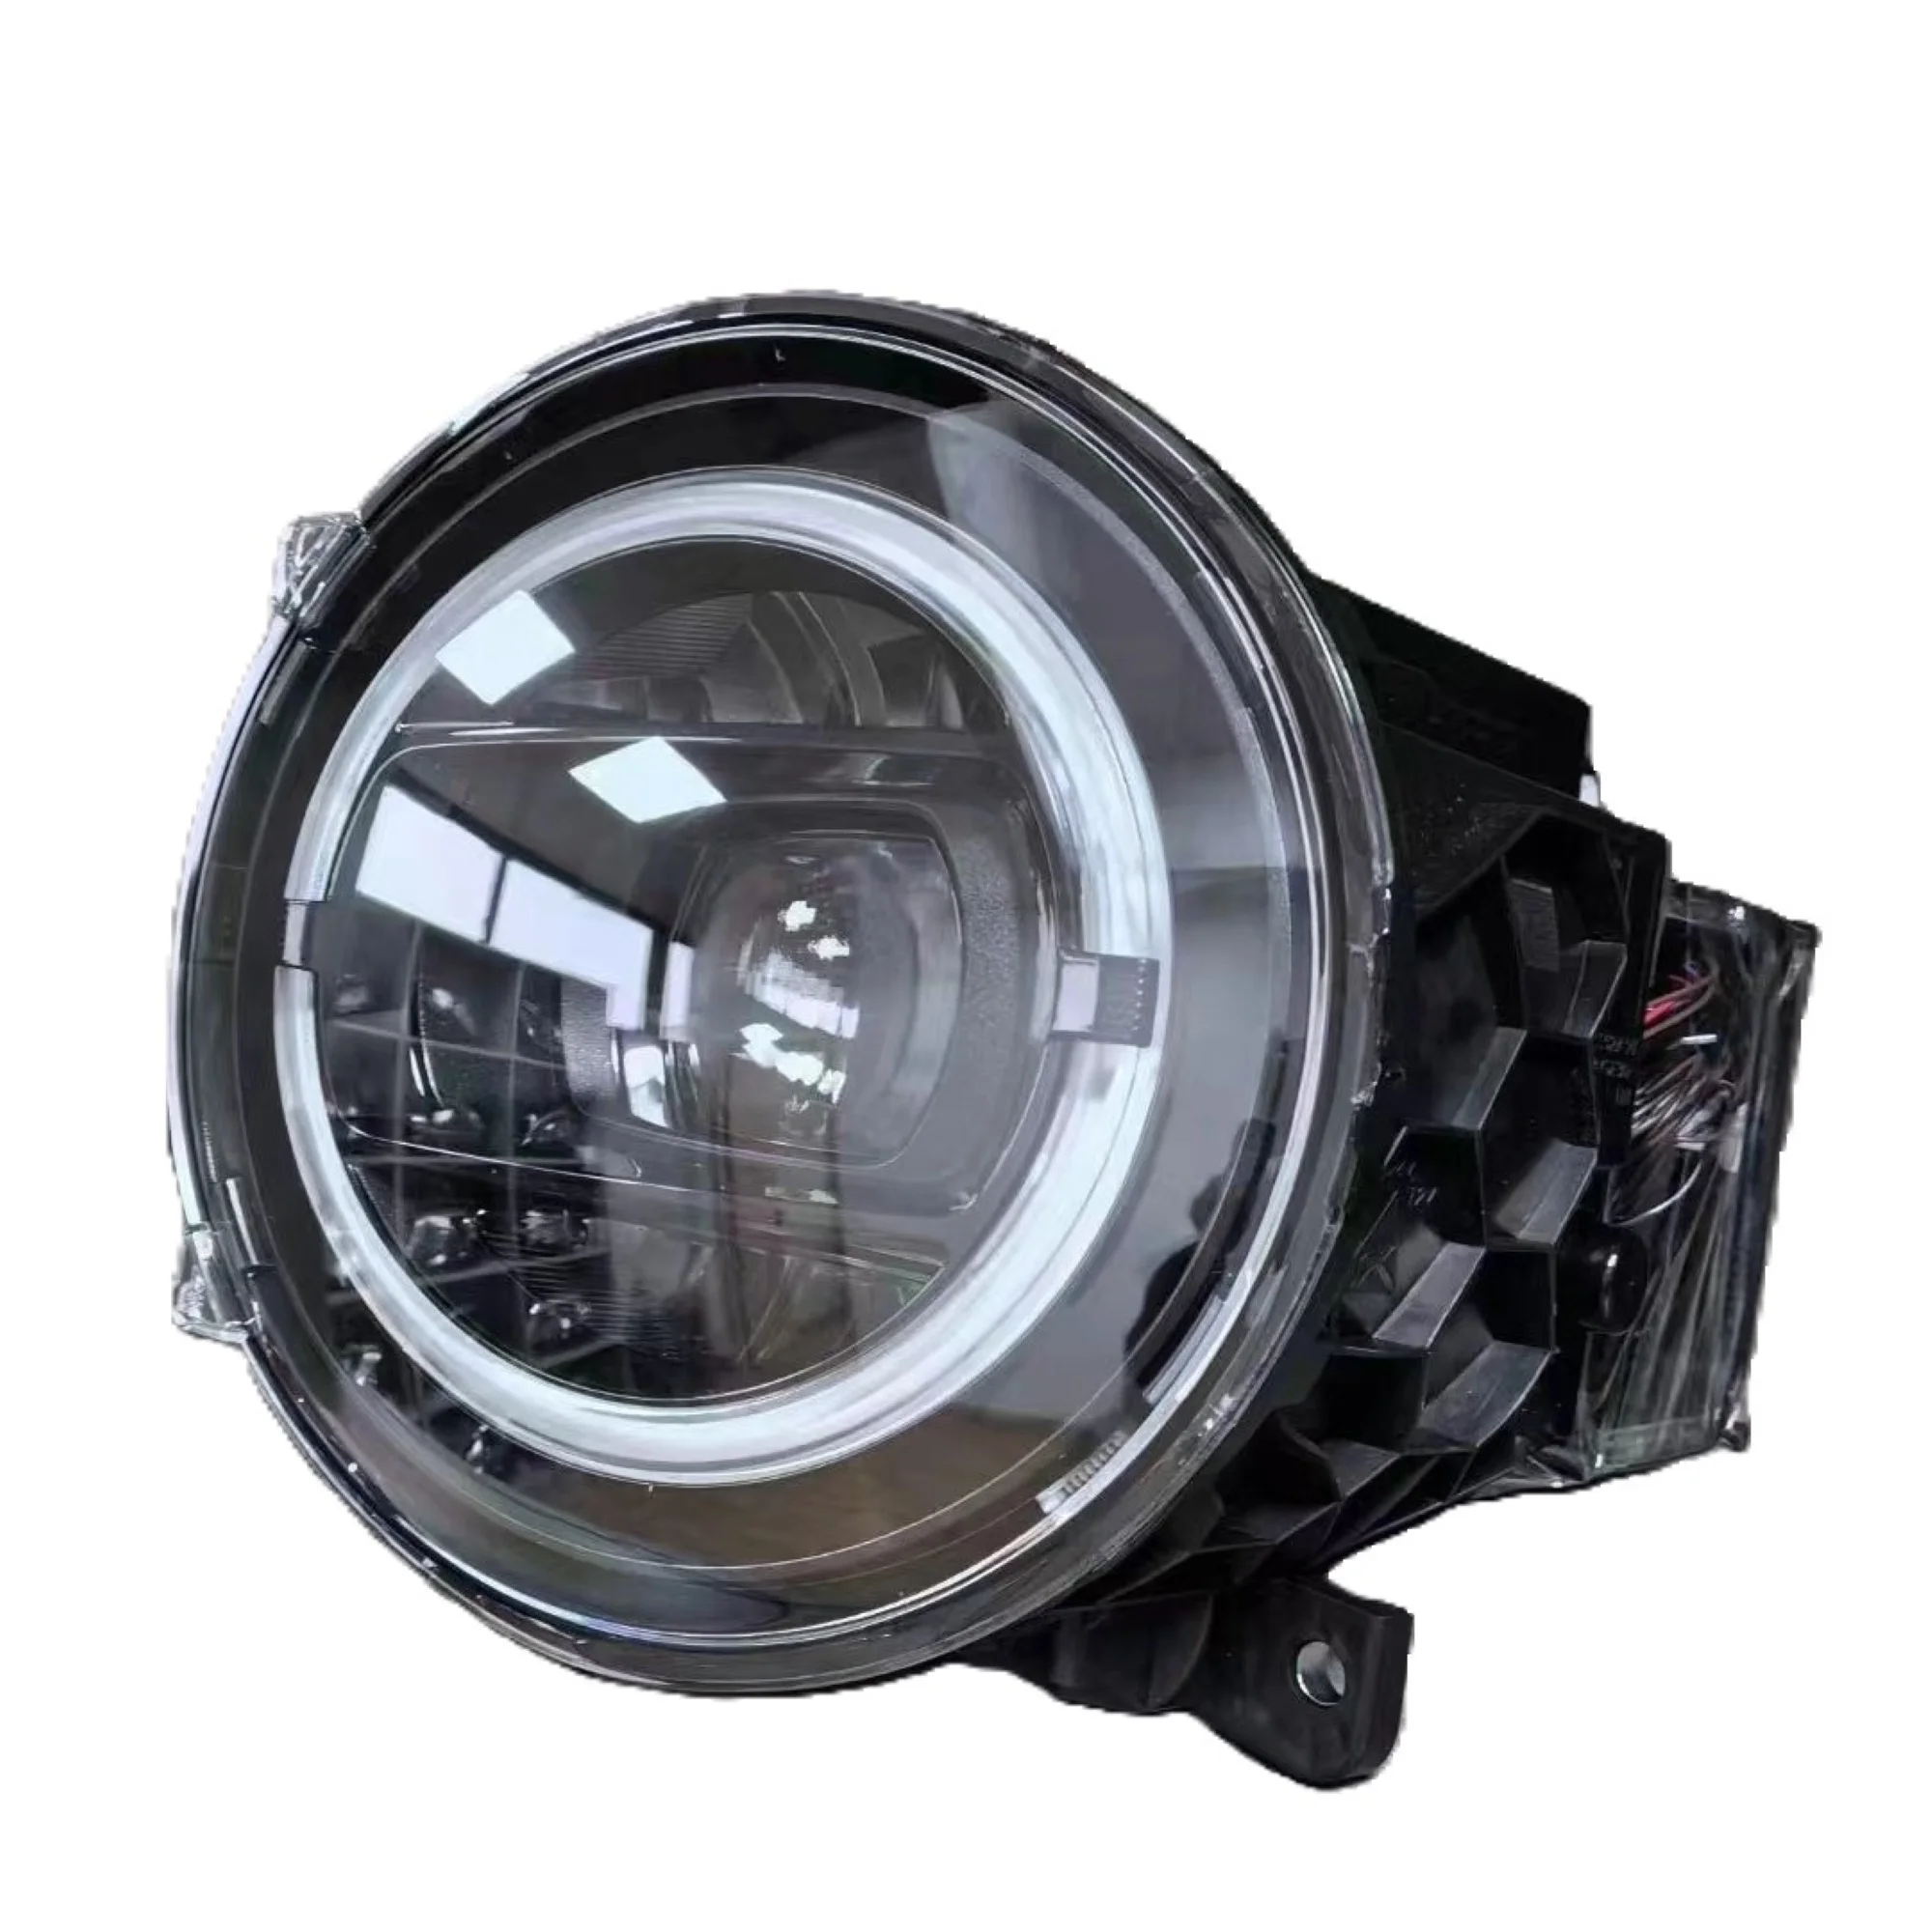 

G Class W464 LED Headlight Upgrade Suitable For Mercedes Benz 2019 Low Configuration To High Version G63 G500 G65 G350 G550 W463